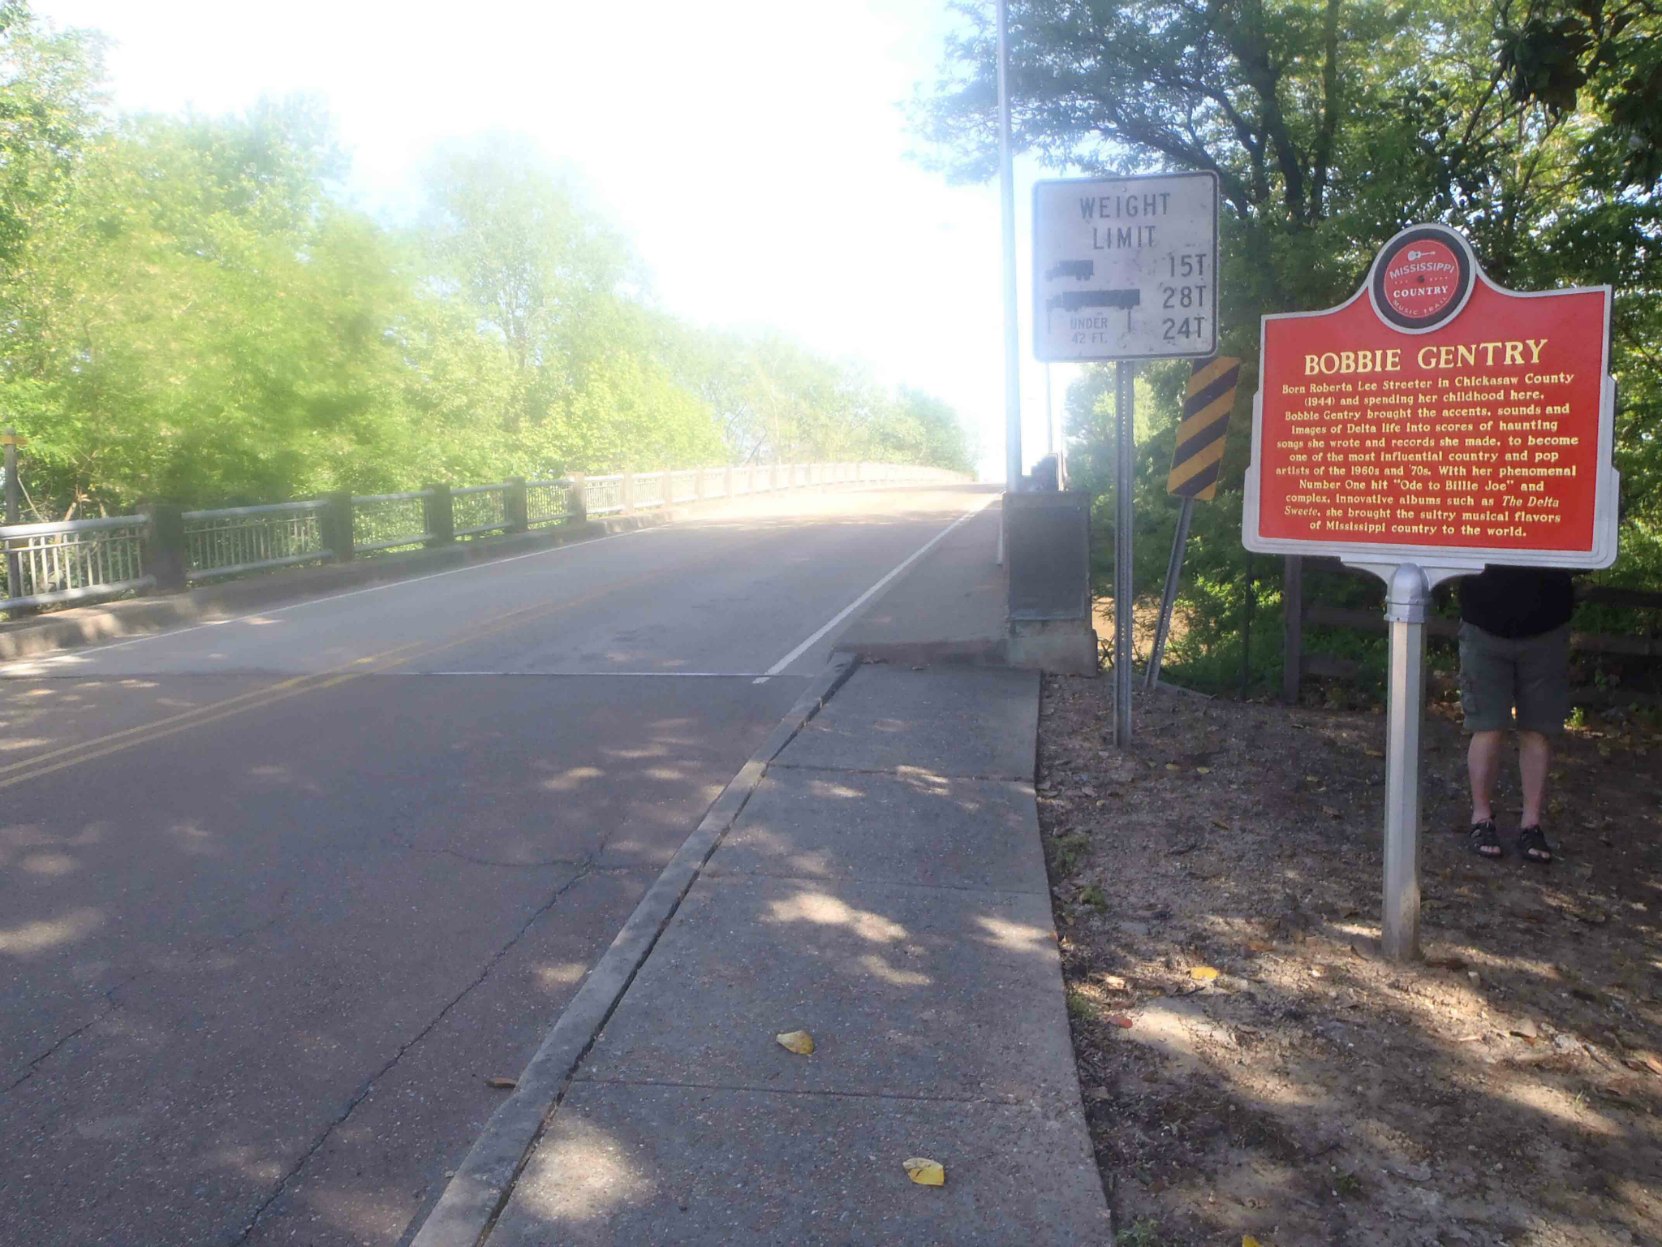 The Mississippi Country Music Trail marker for Bobbie Gentry, is at the entrance to a bridge over the Tallahatchie River on Grand Avenue, Greenwood, Mississippi